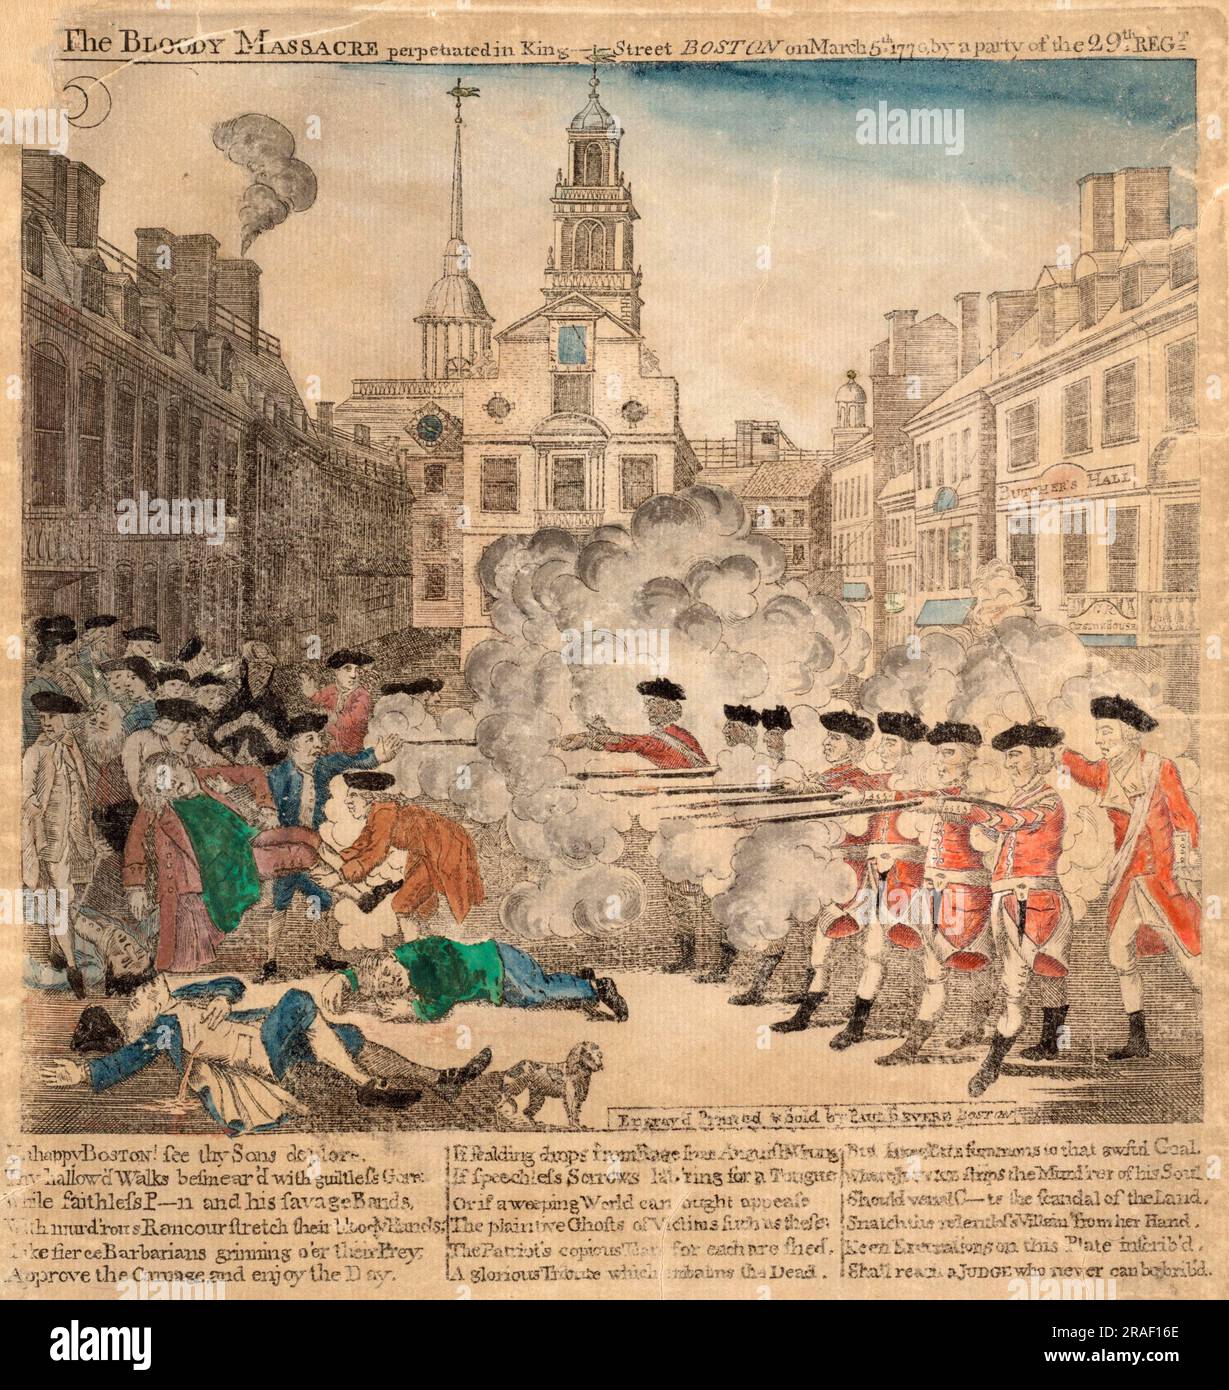 Boston Massacre, Boston Massacre, an incident during the American Revolution on March 5, 1770, in which five civilians were killed by British troops. Called a massacre for propaganda purposes, the event became a beacon for groups pursuing independence for the colonies and contributed to the outbreak of the American War of Independence, Historic, digitally restored reproduction from a 19th century original  /  Massaker von Boston, Boston Massacre, ein Vorfall während der Amerikanischen Revolution am 5. März 1770, bei dem fünf Zivilisten von britischen Truppen getötet wurden. Das zum Zweck der P Stock Photo